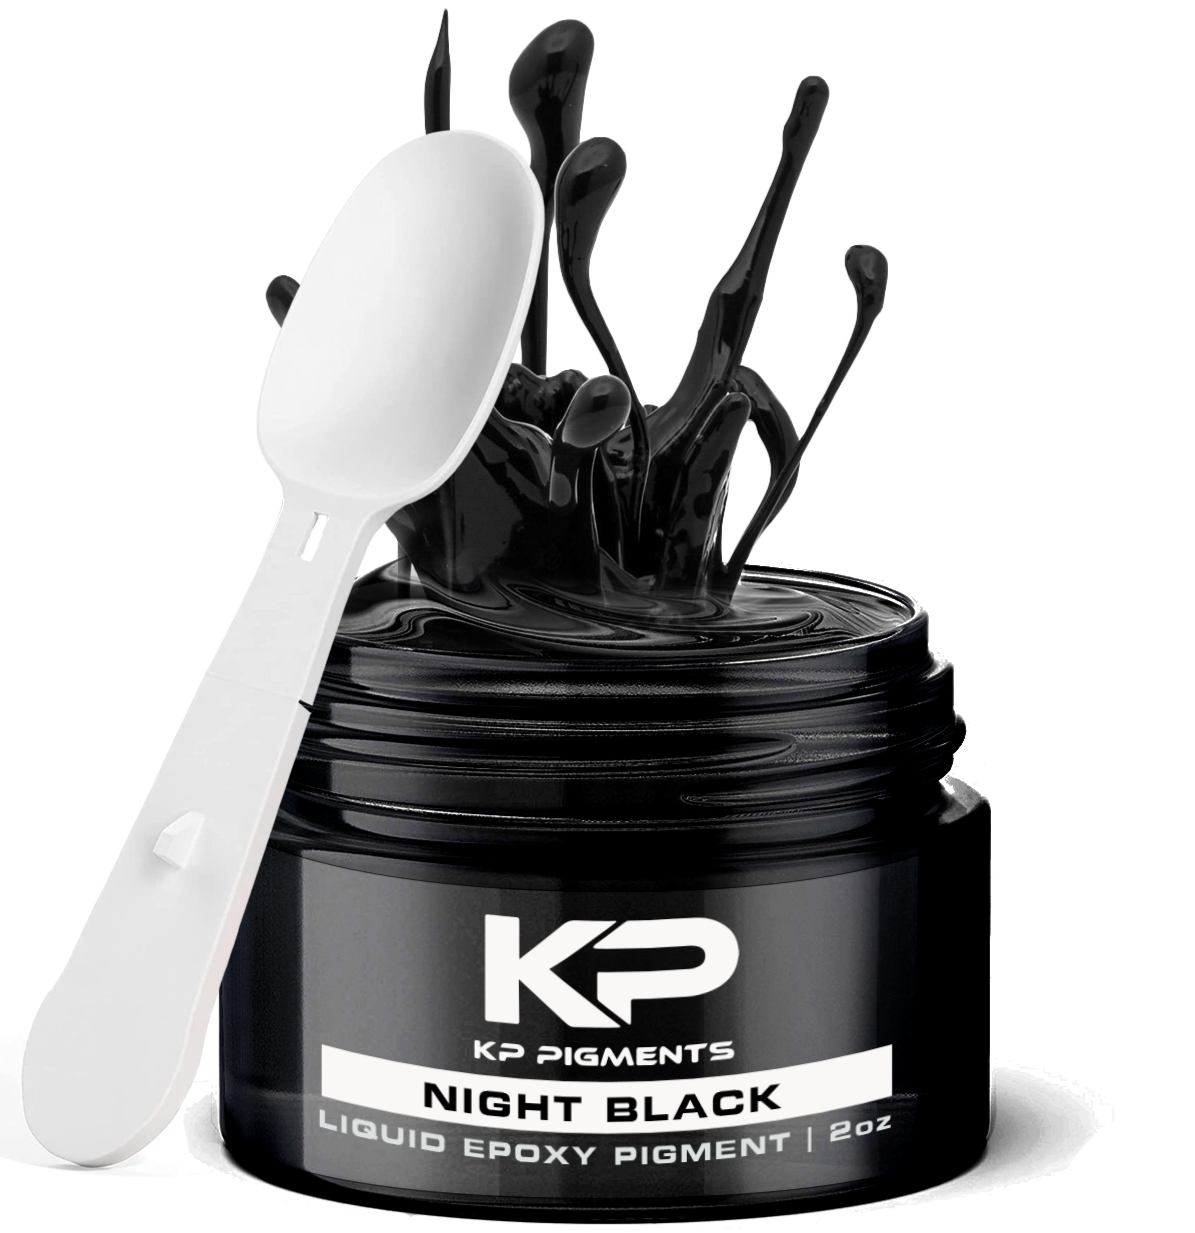 Load image into Gallery viewer, Night Black - Epoxy Pigment Paste for Epoxy Resin, Tint/Pigment Paste with Spoon for Arts and Crafts, Jewelry, Resin Woodworking and More!